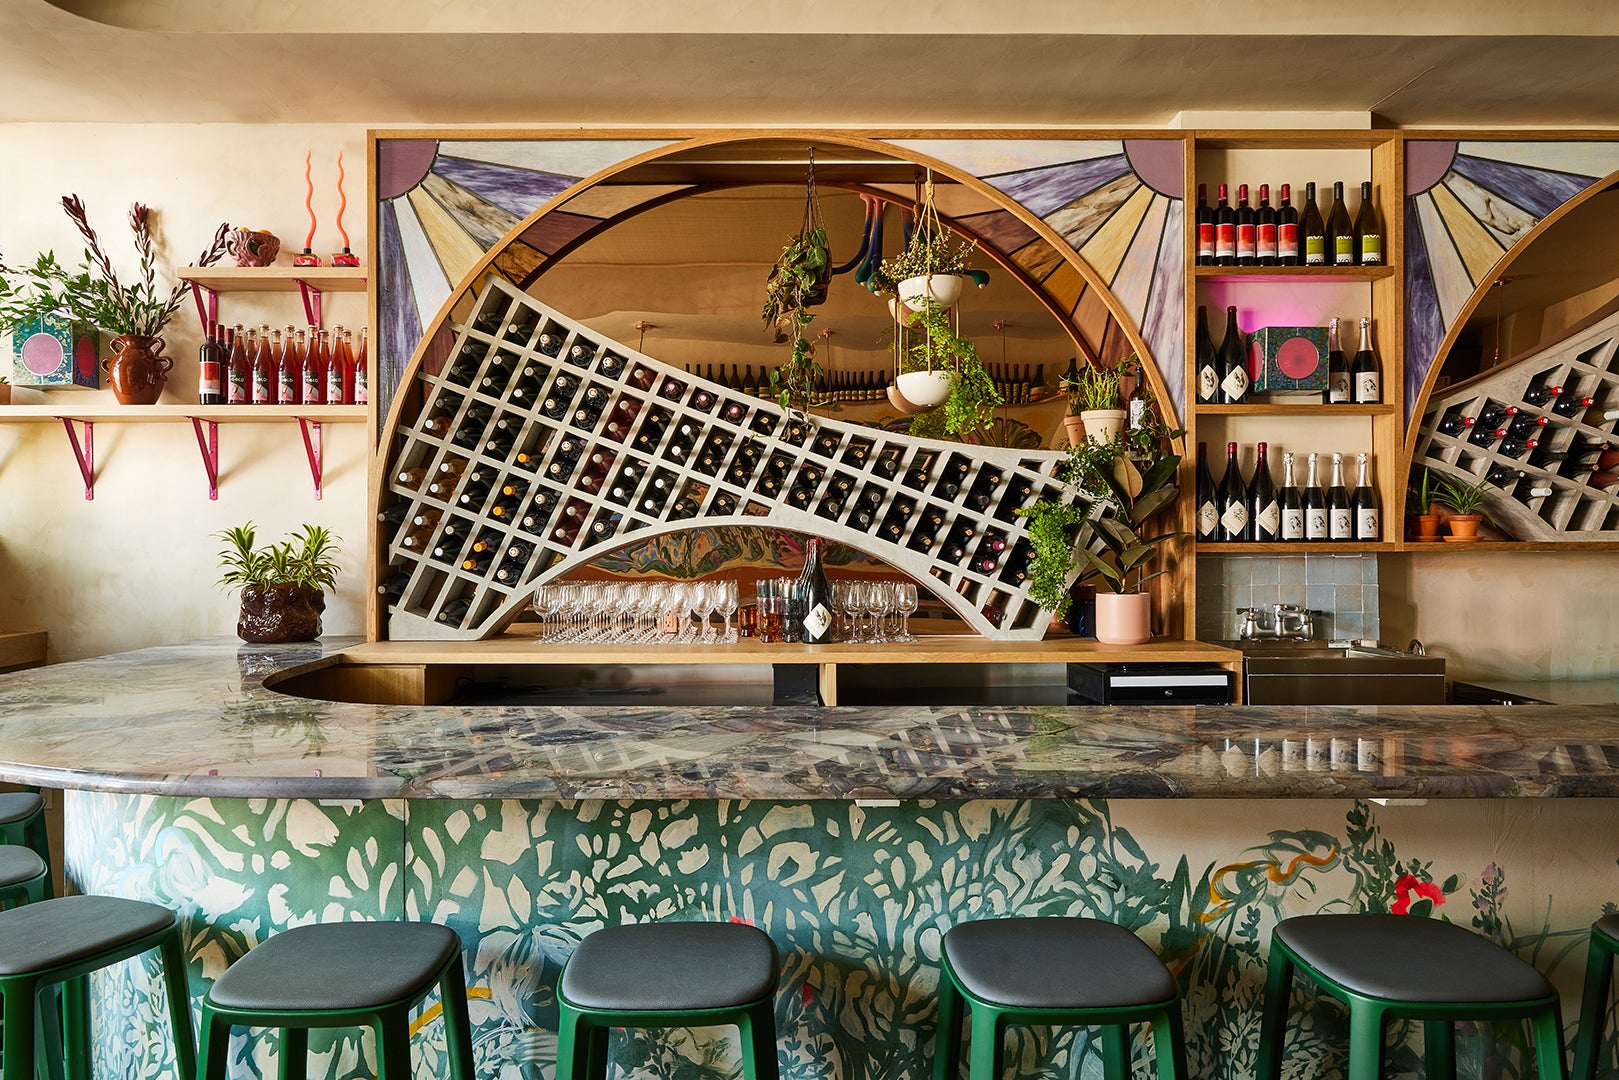 Drink Up All The Stained Glass, Floral Murals, and Natural Wine At Moonflower In New York